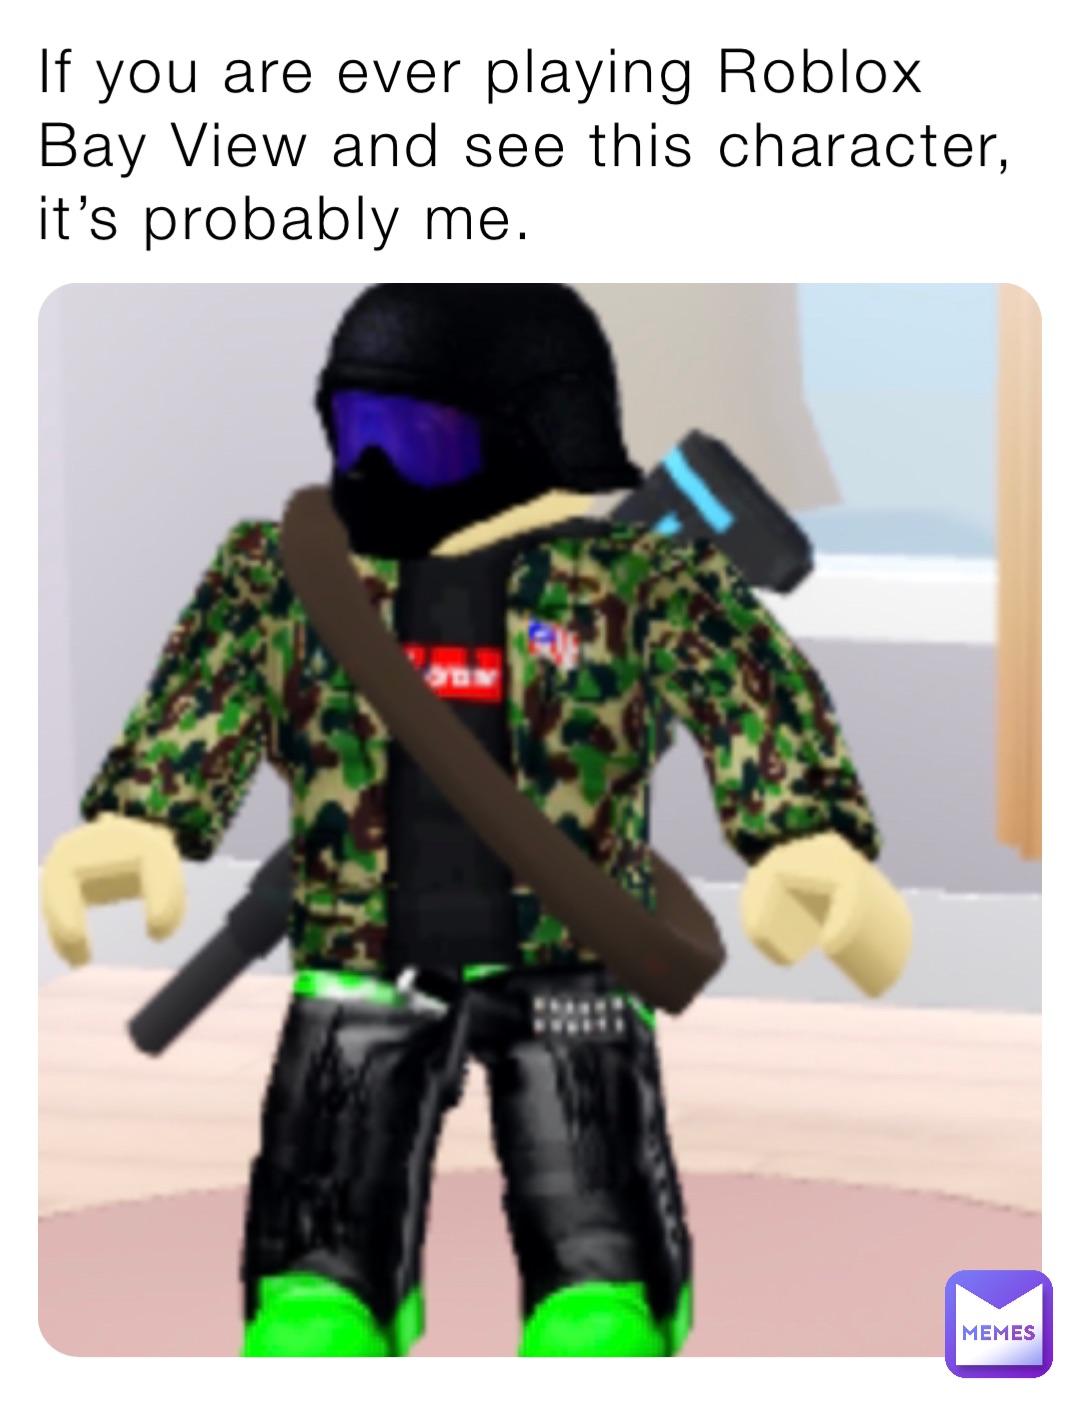 If you are ever playing Roblox Bay View and see this character, it’s probably me.